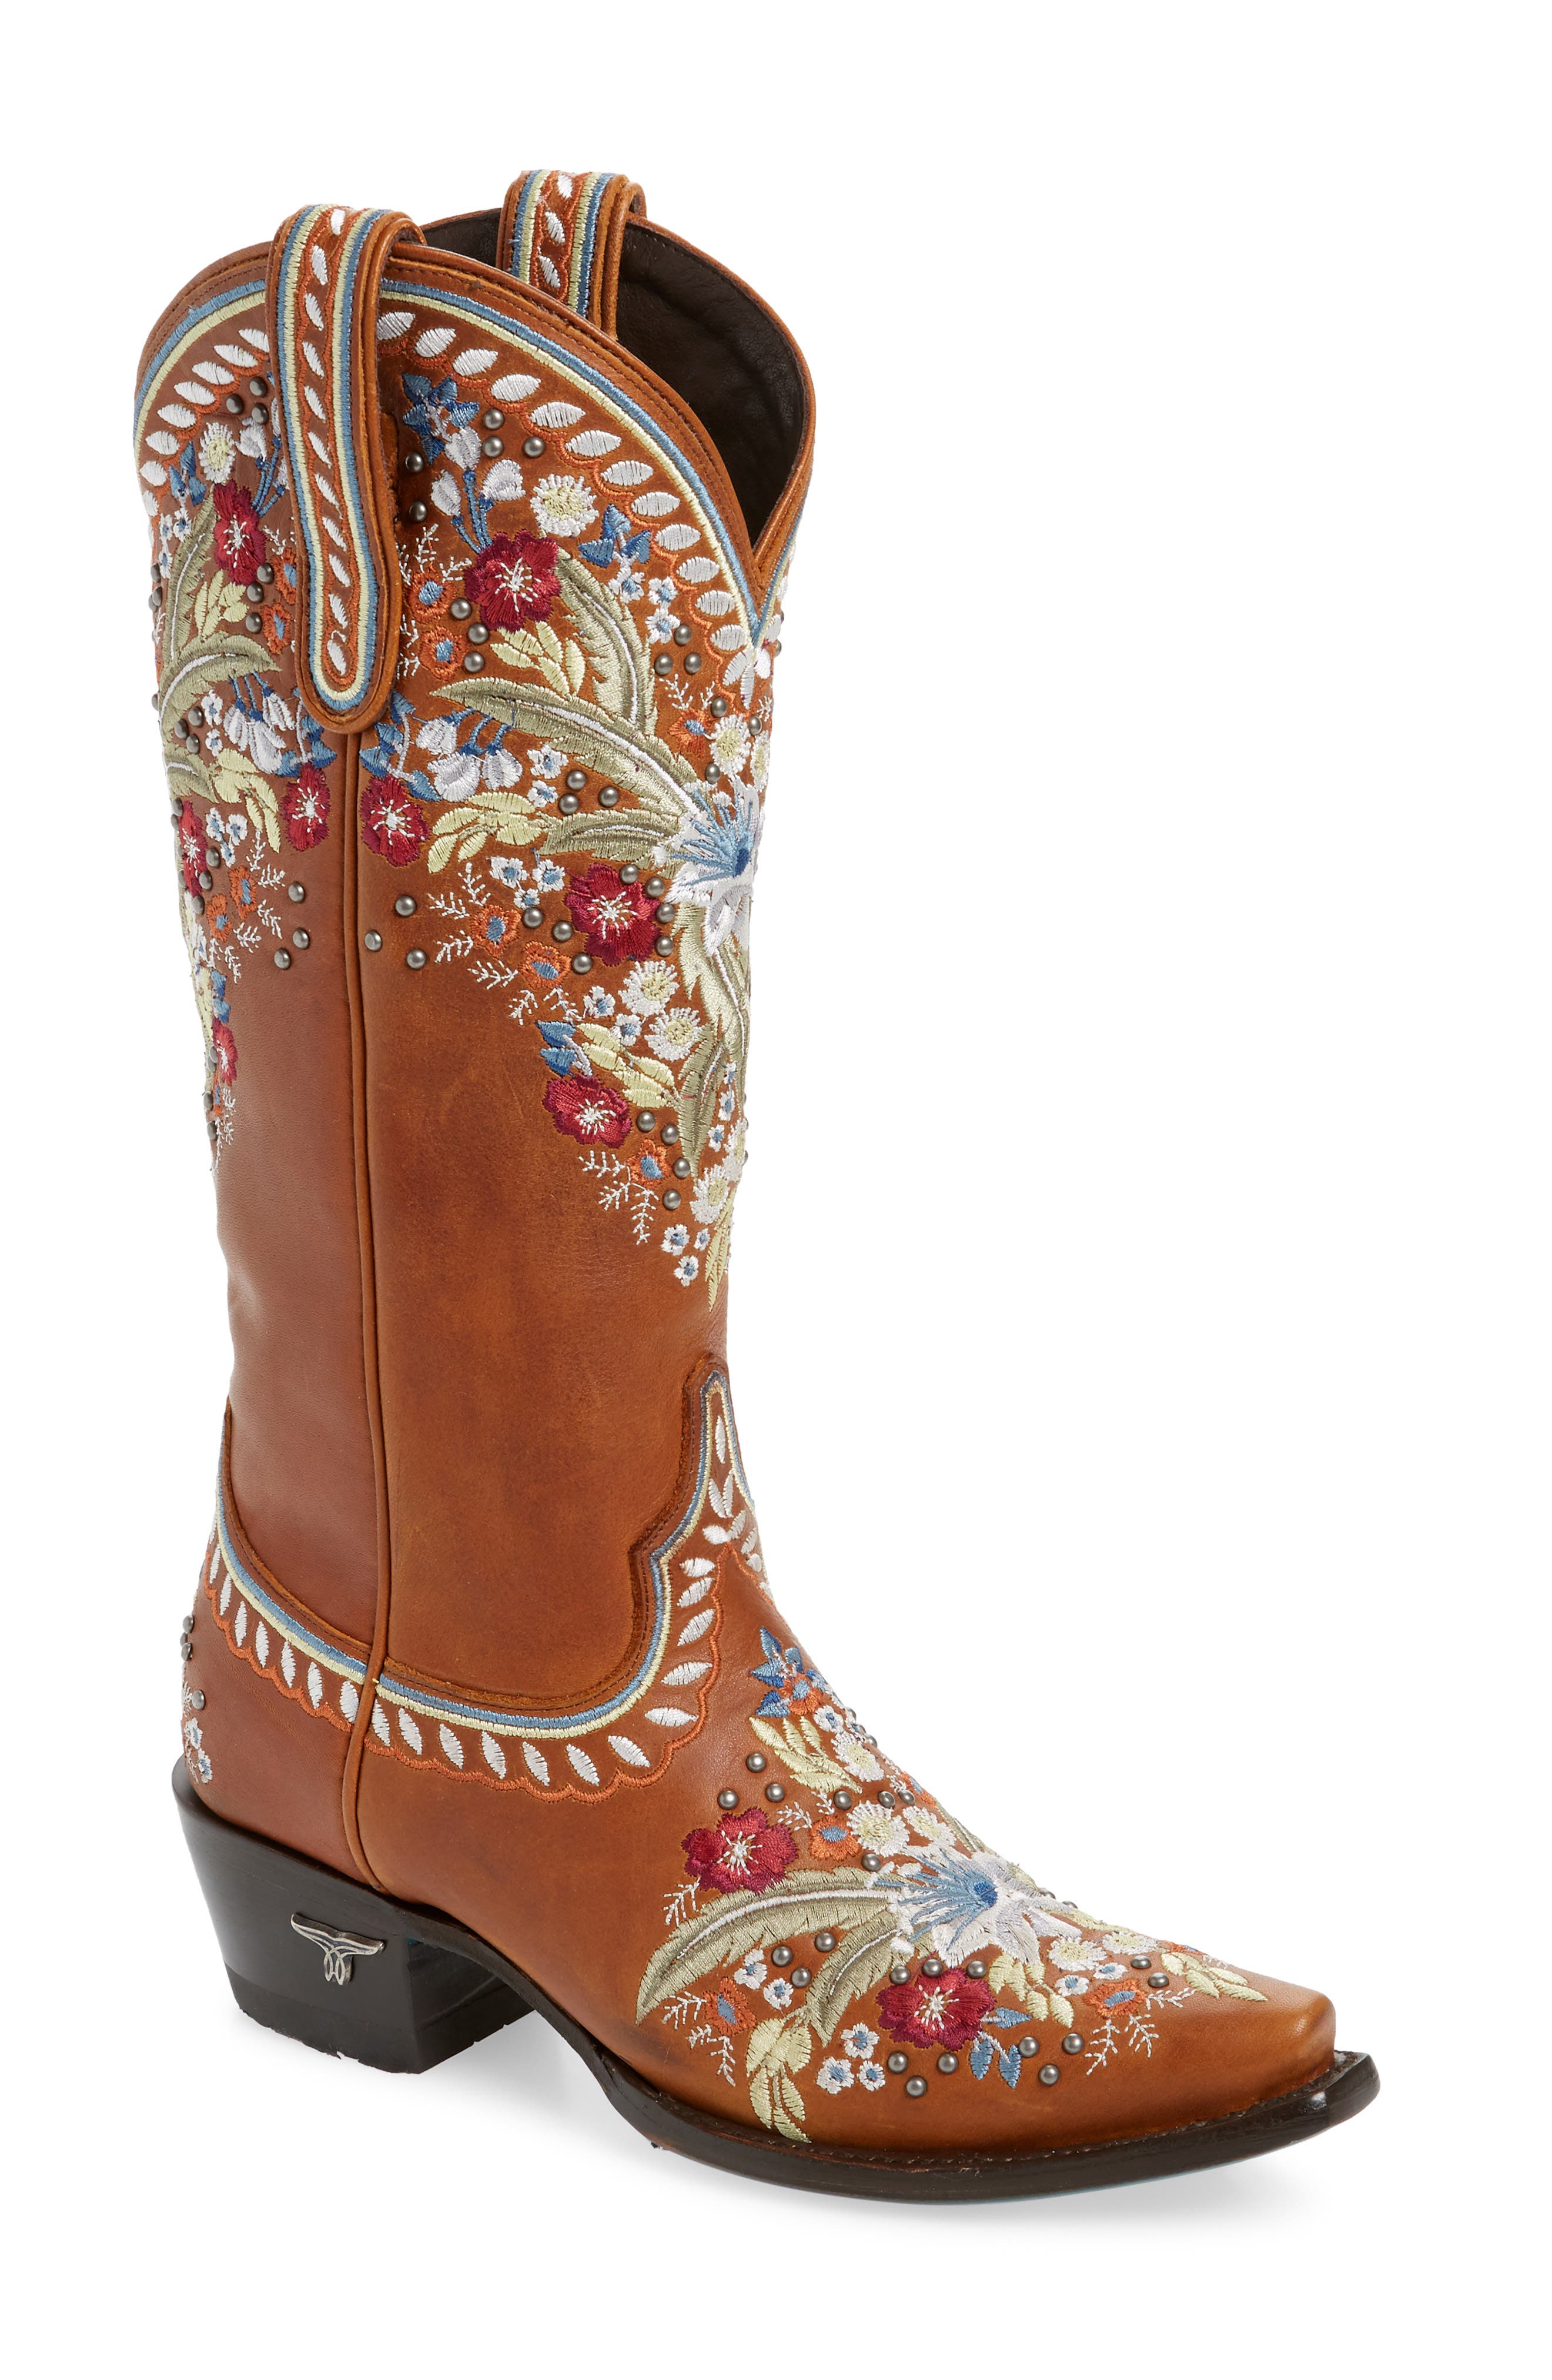 Lane Boots Chloe Floral Embroidered 